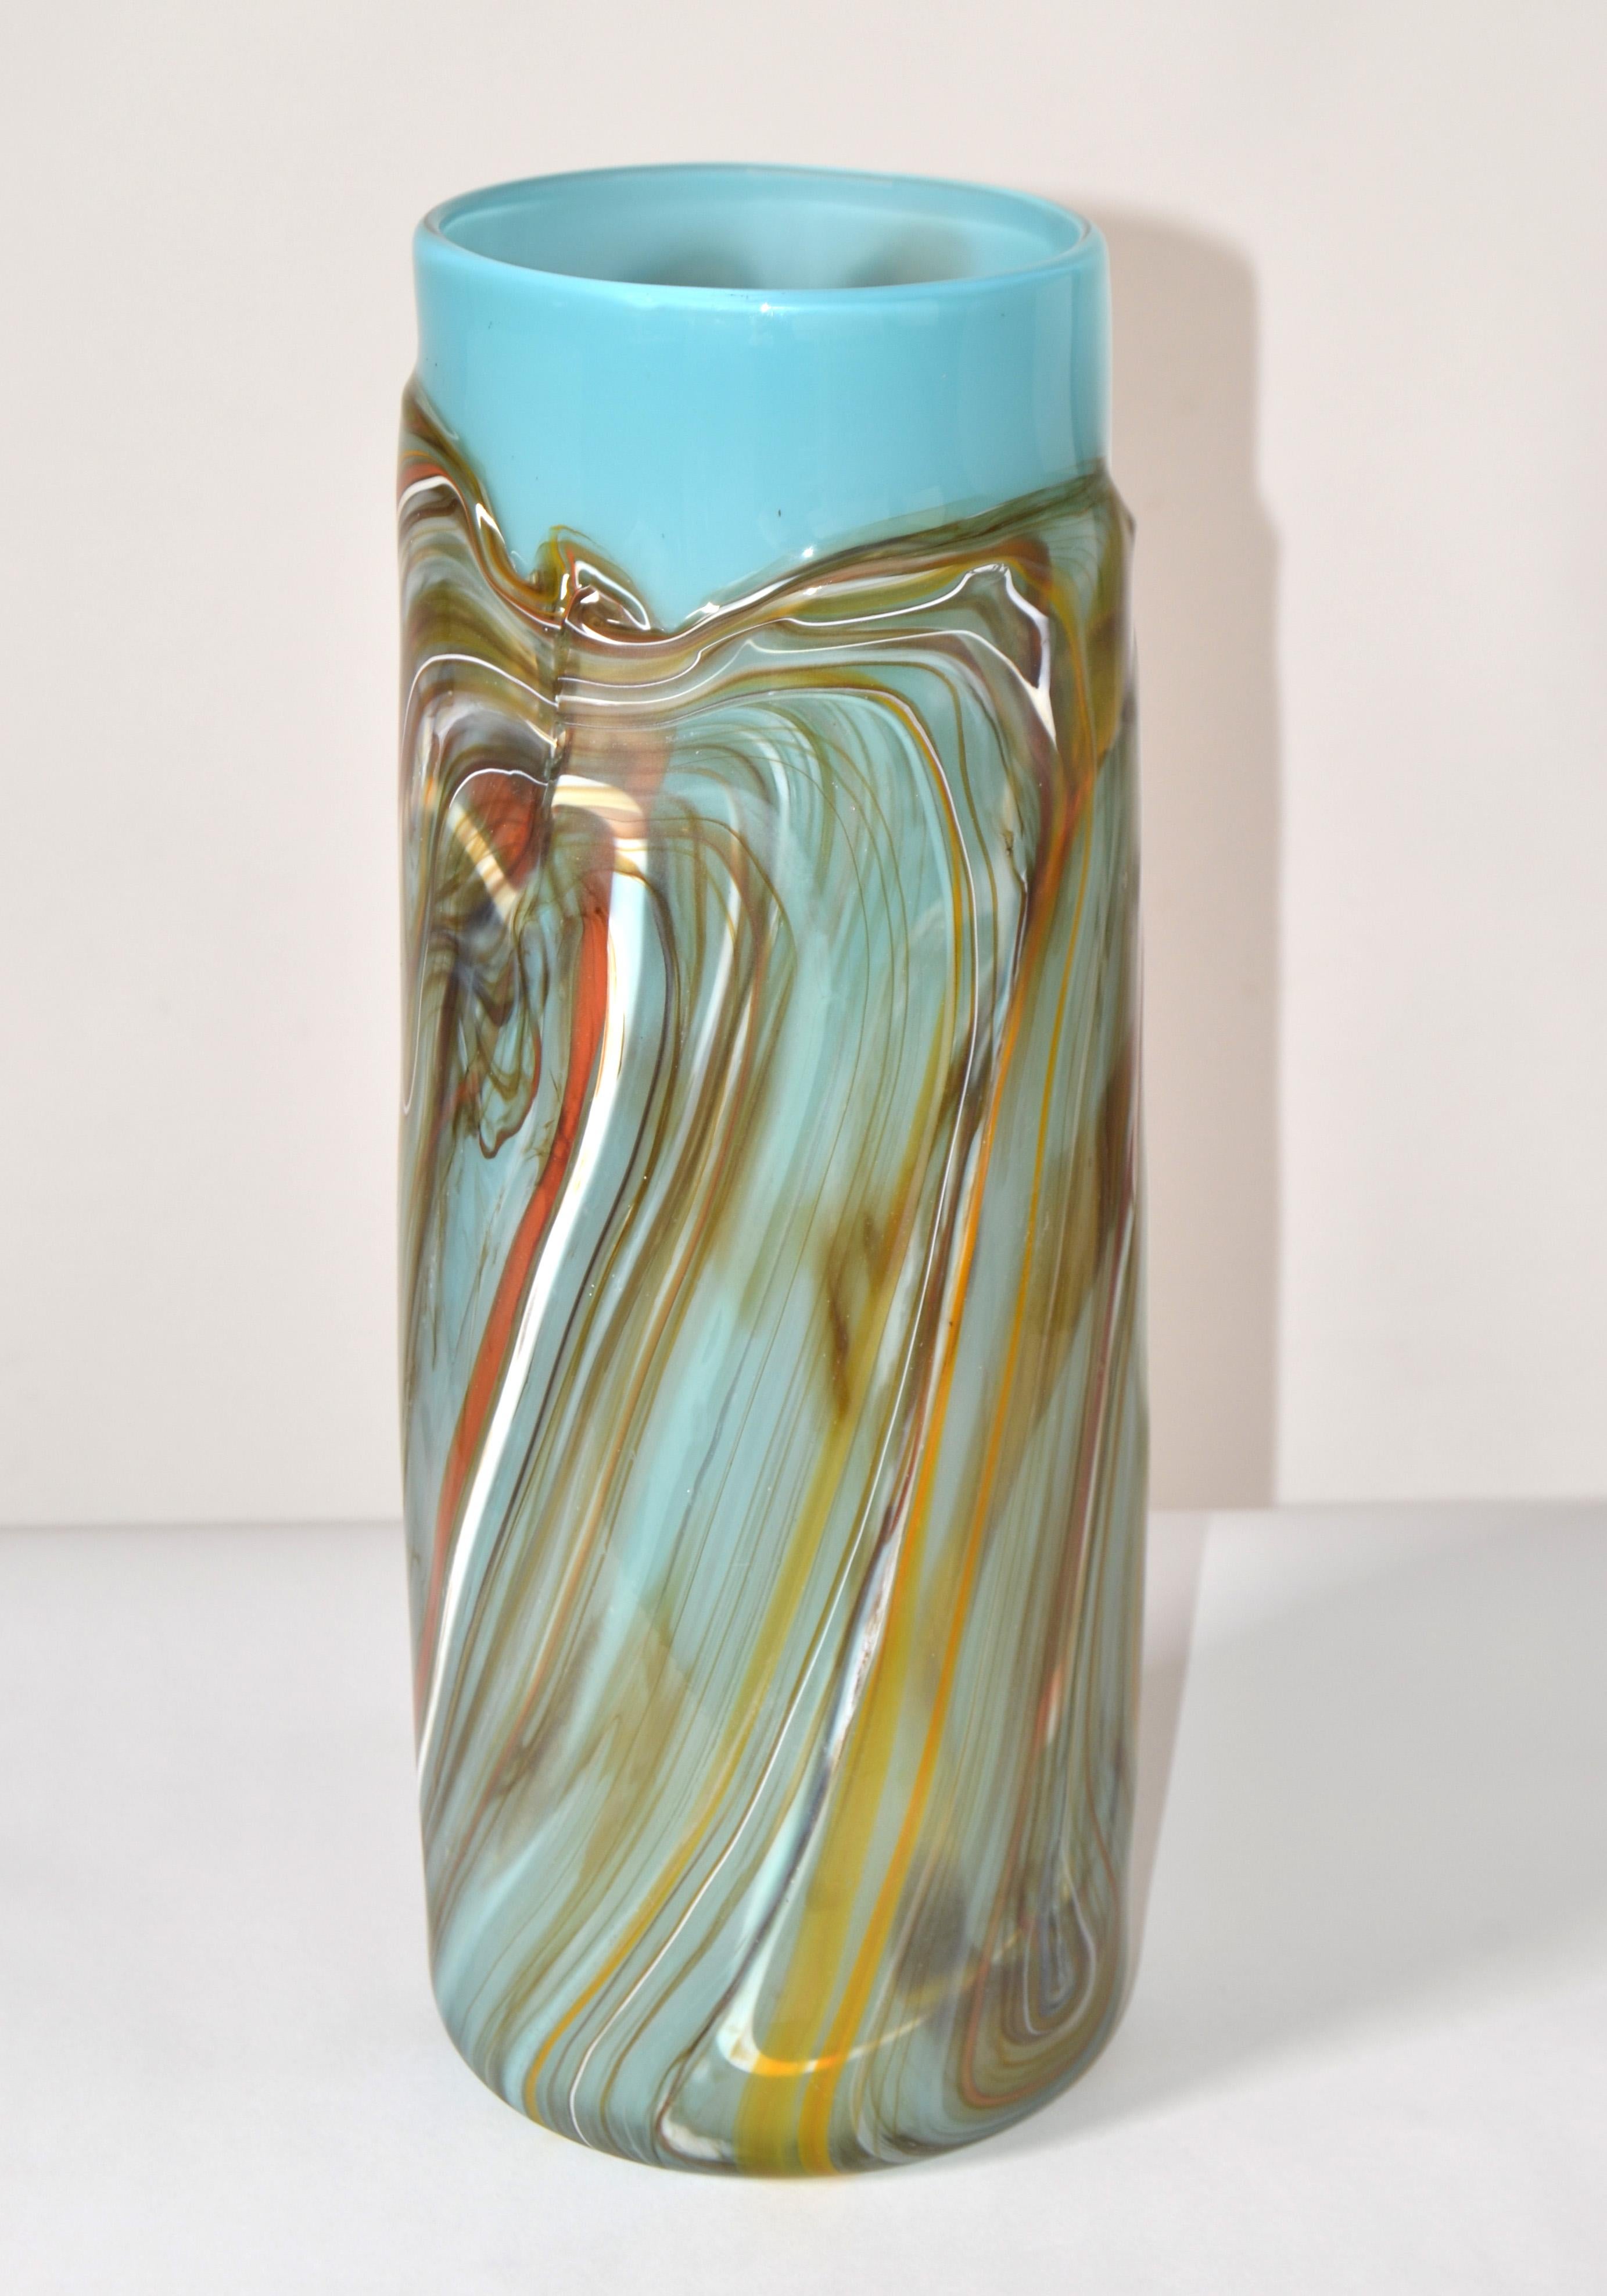 Hand-Crafted Vintage Studio Art Blown Glass Heavy Vase Vessel Turquoise and Hues Brown 1975 For Sale